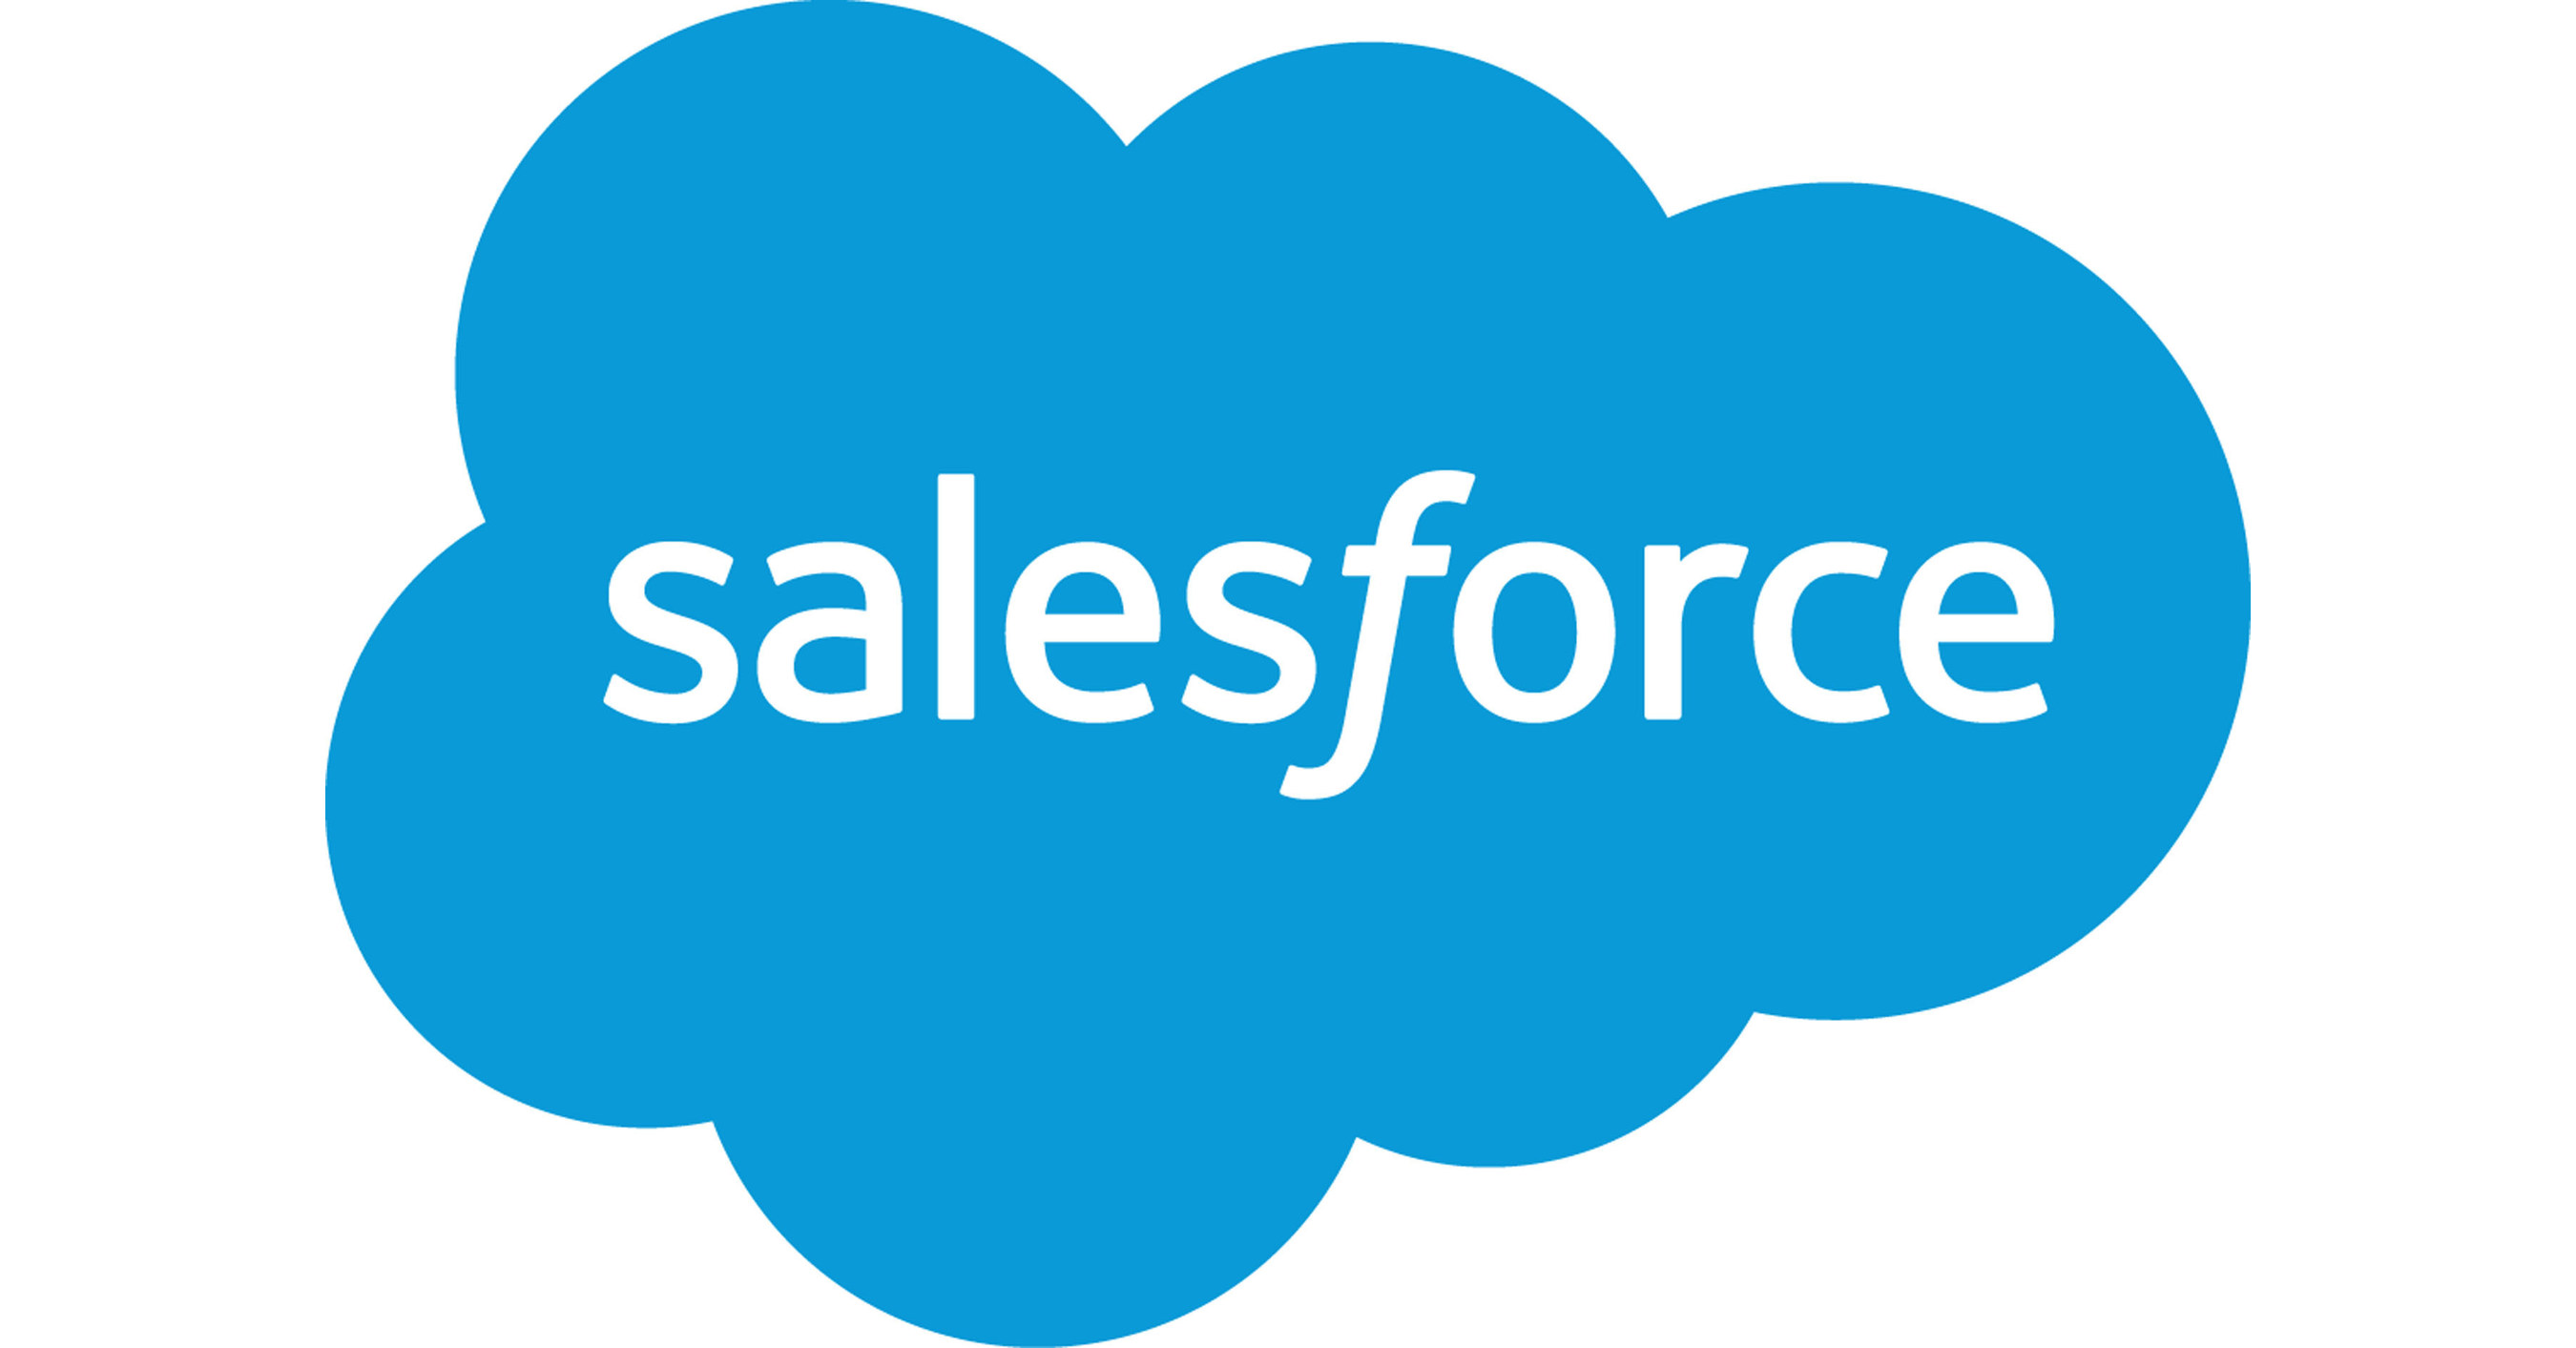 Salesforce to Invest 2 Billion in its Canadian Business Over Five Years